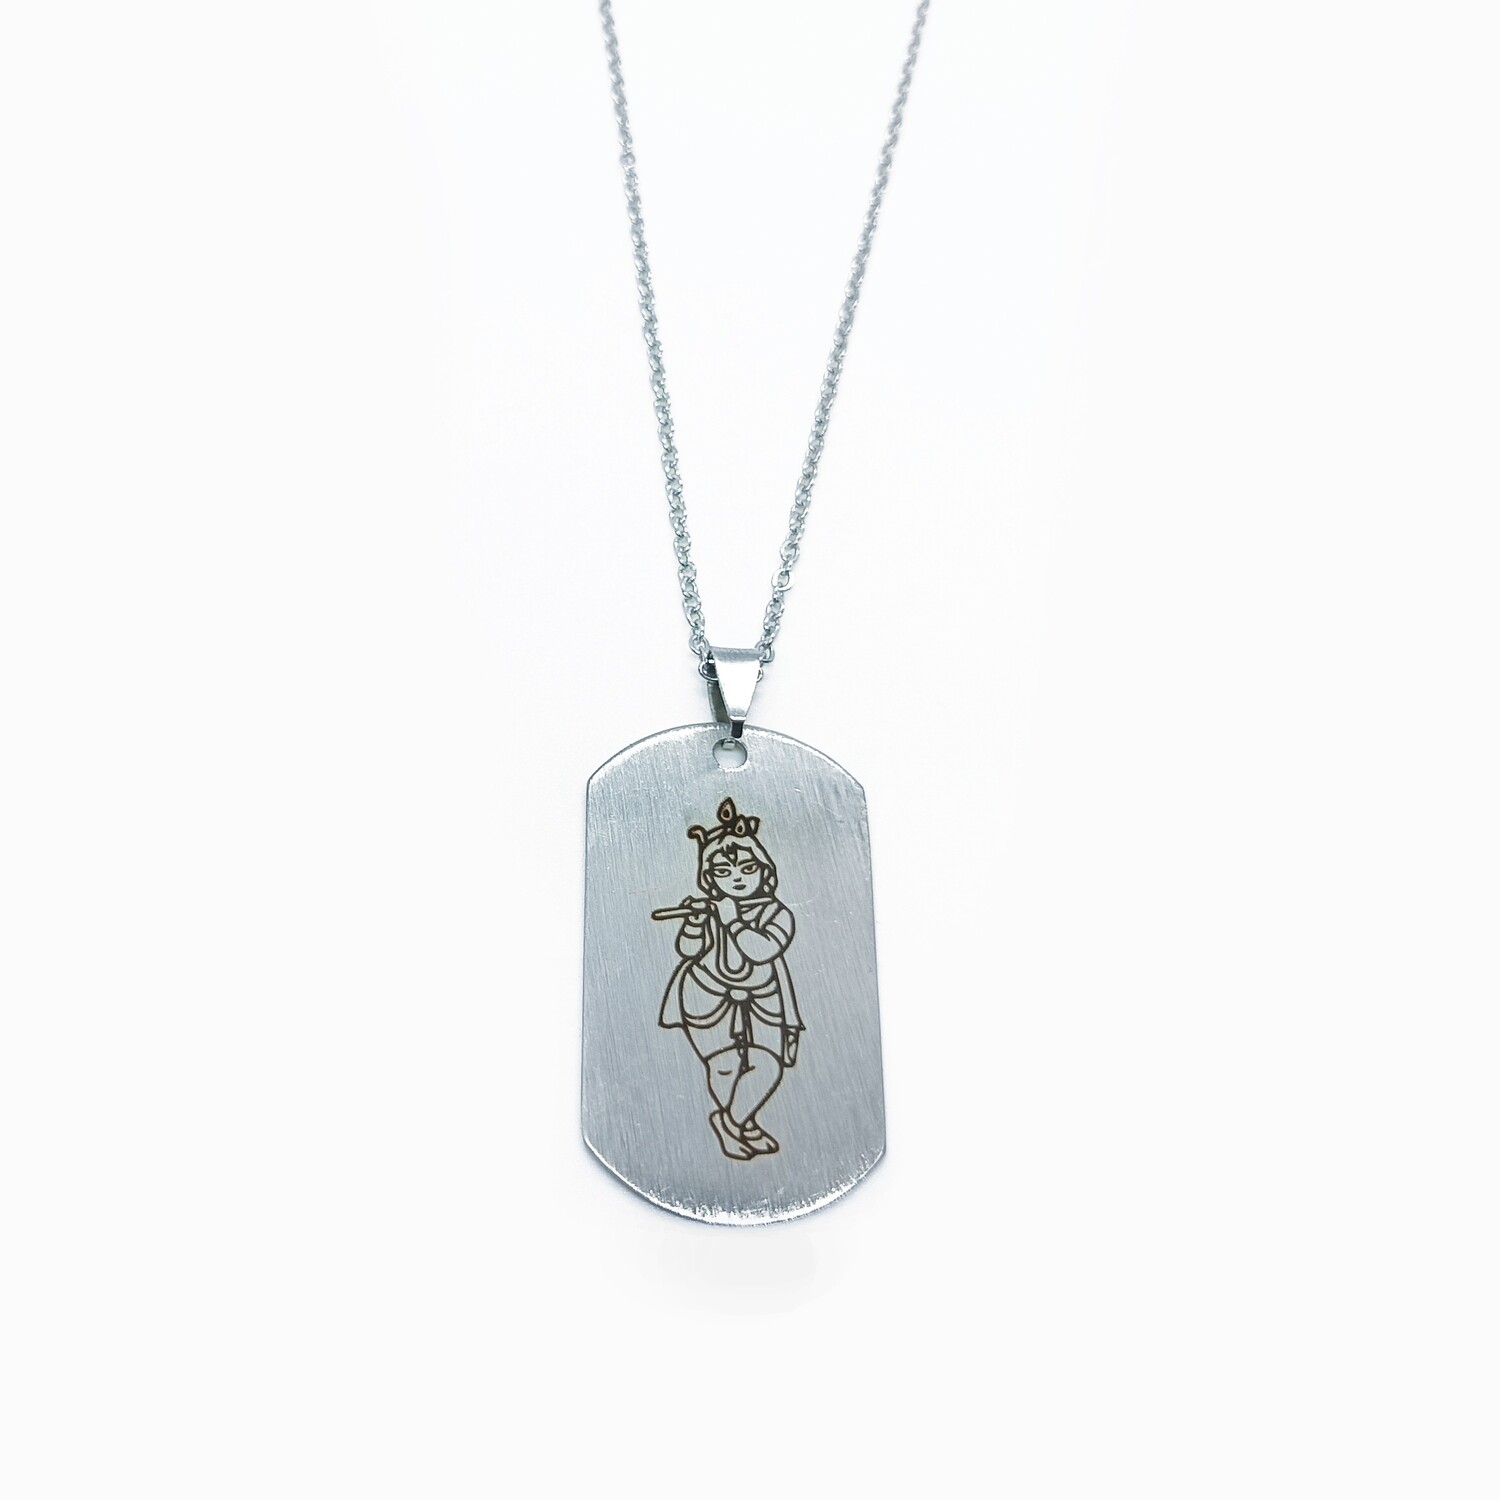 Lord Krishna necklace engraved